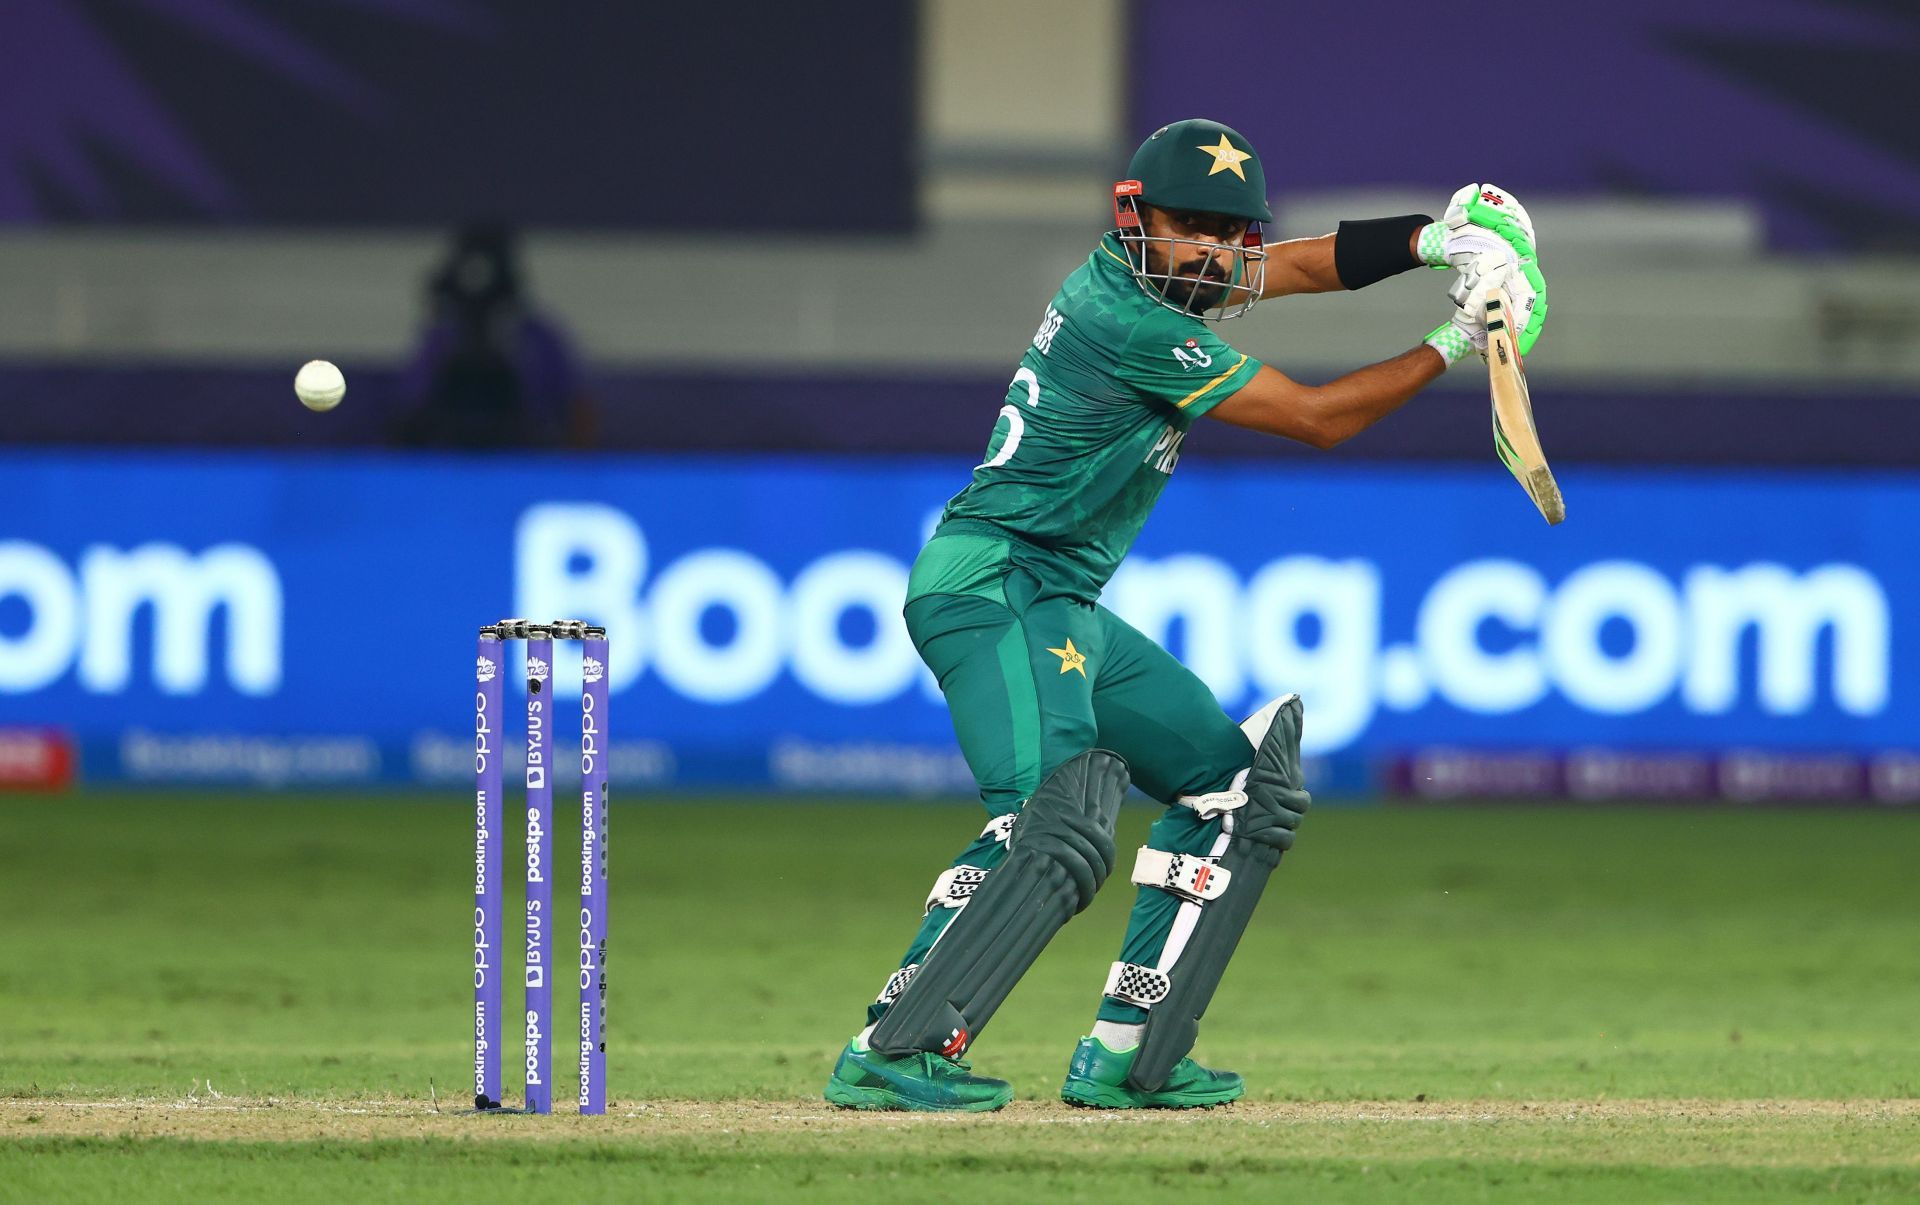 Babar Azam was among the set of players who wanted clarity over certain clauses